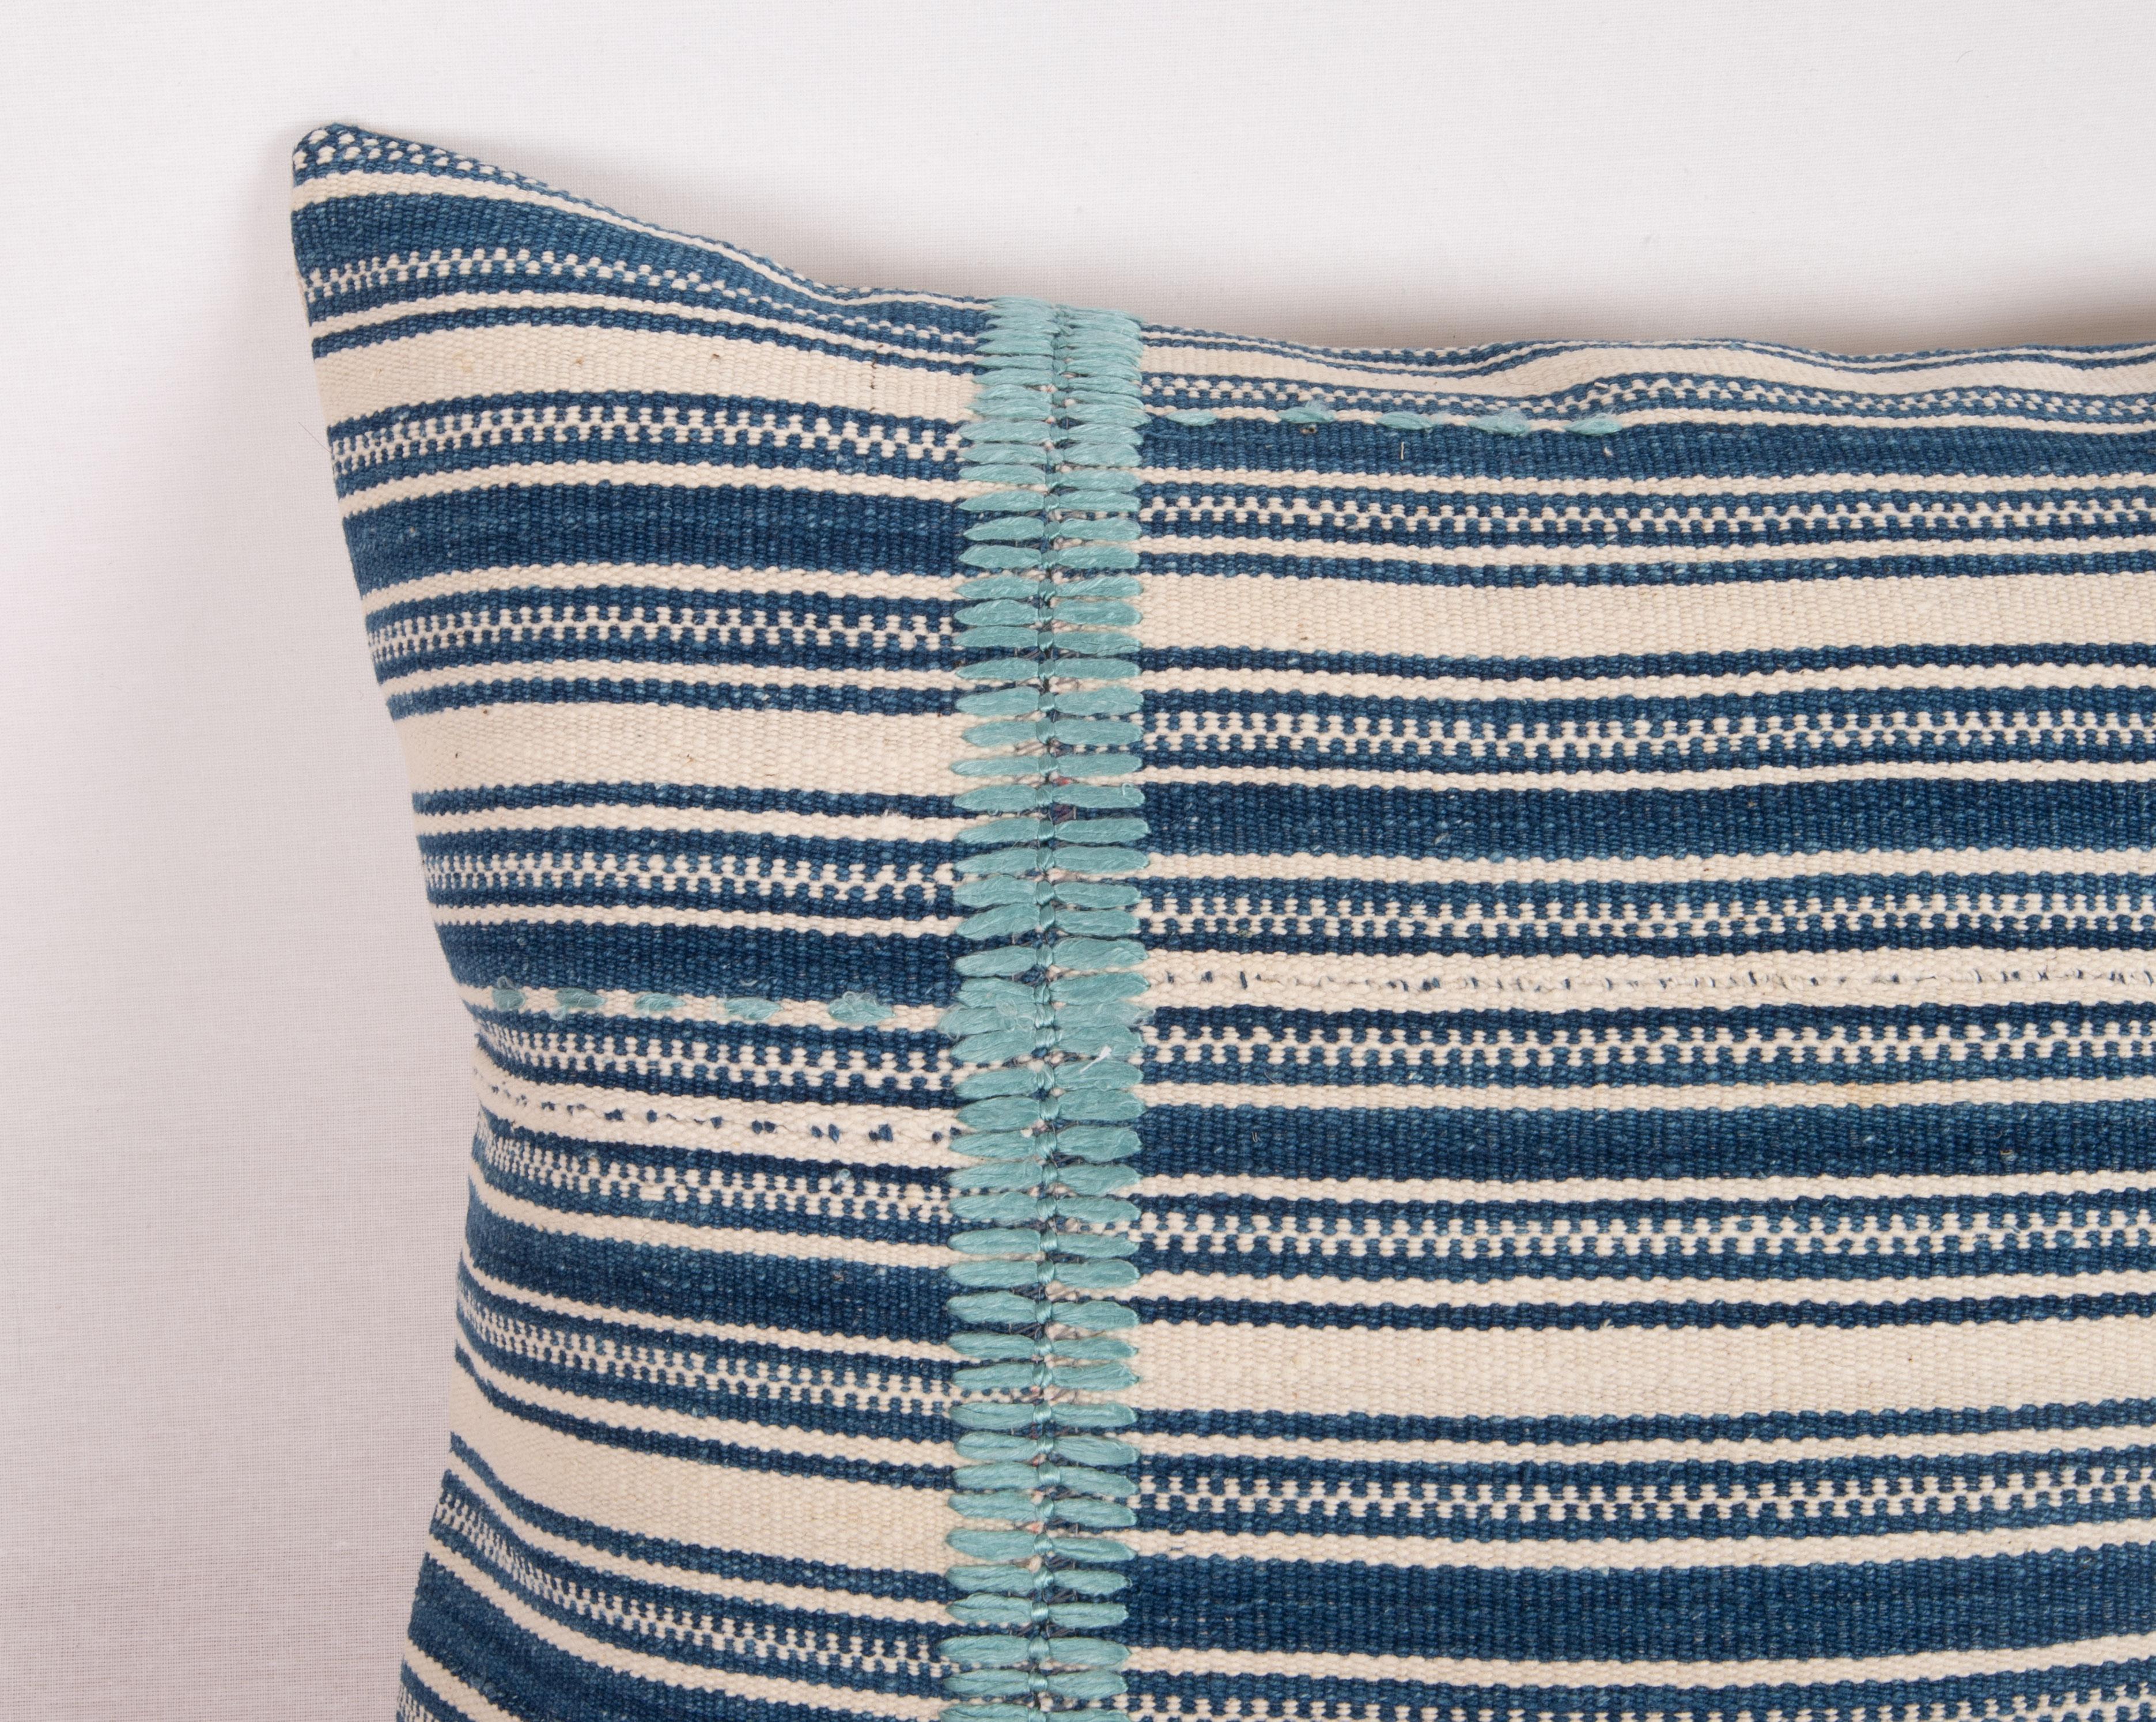 Hand-Woven Indigo Stripped Pillow Cover, Made from a Mid 20th C. Turkish Kilim